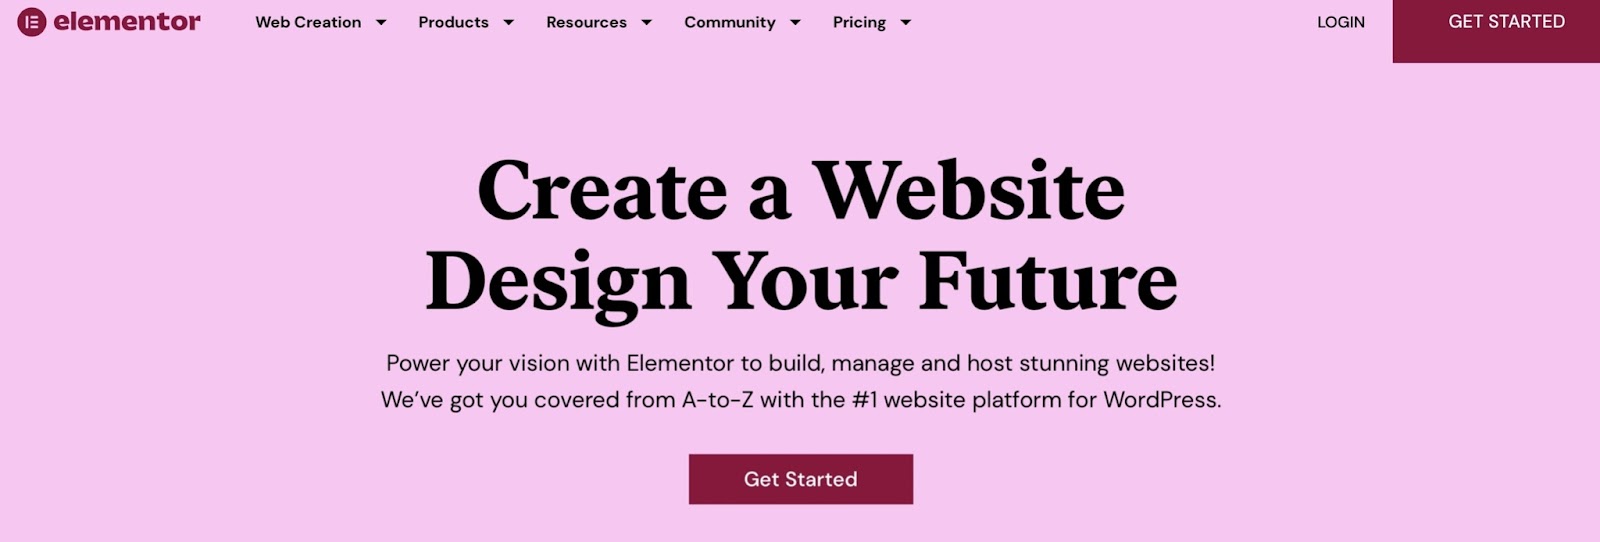 One of the most popular page builders is Elementor.